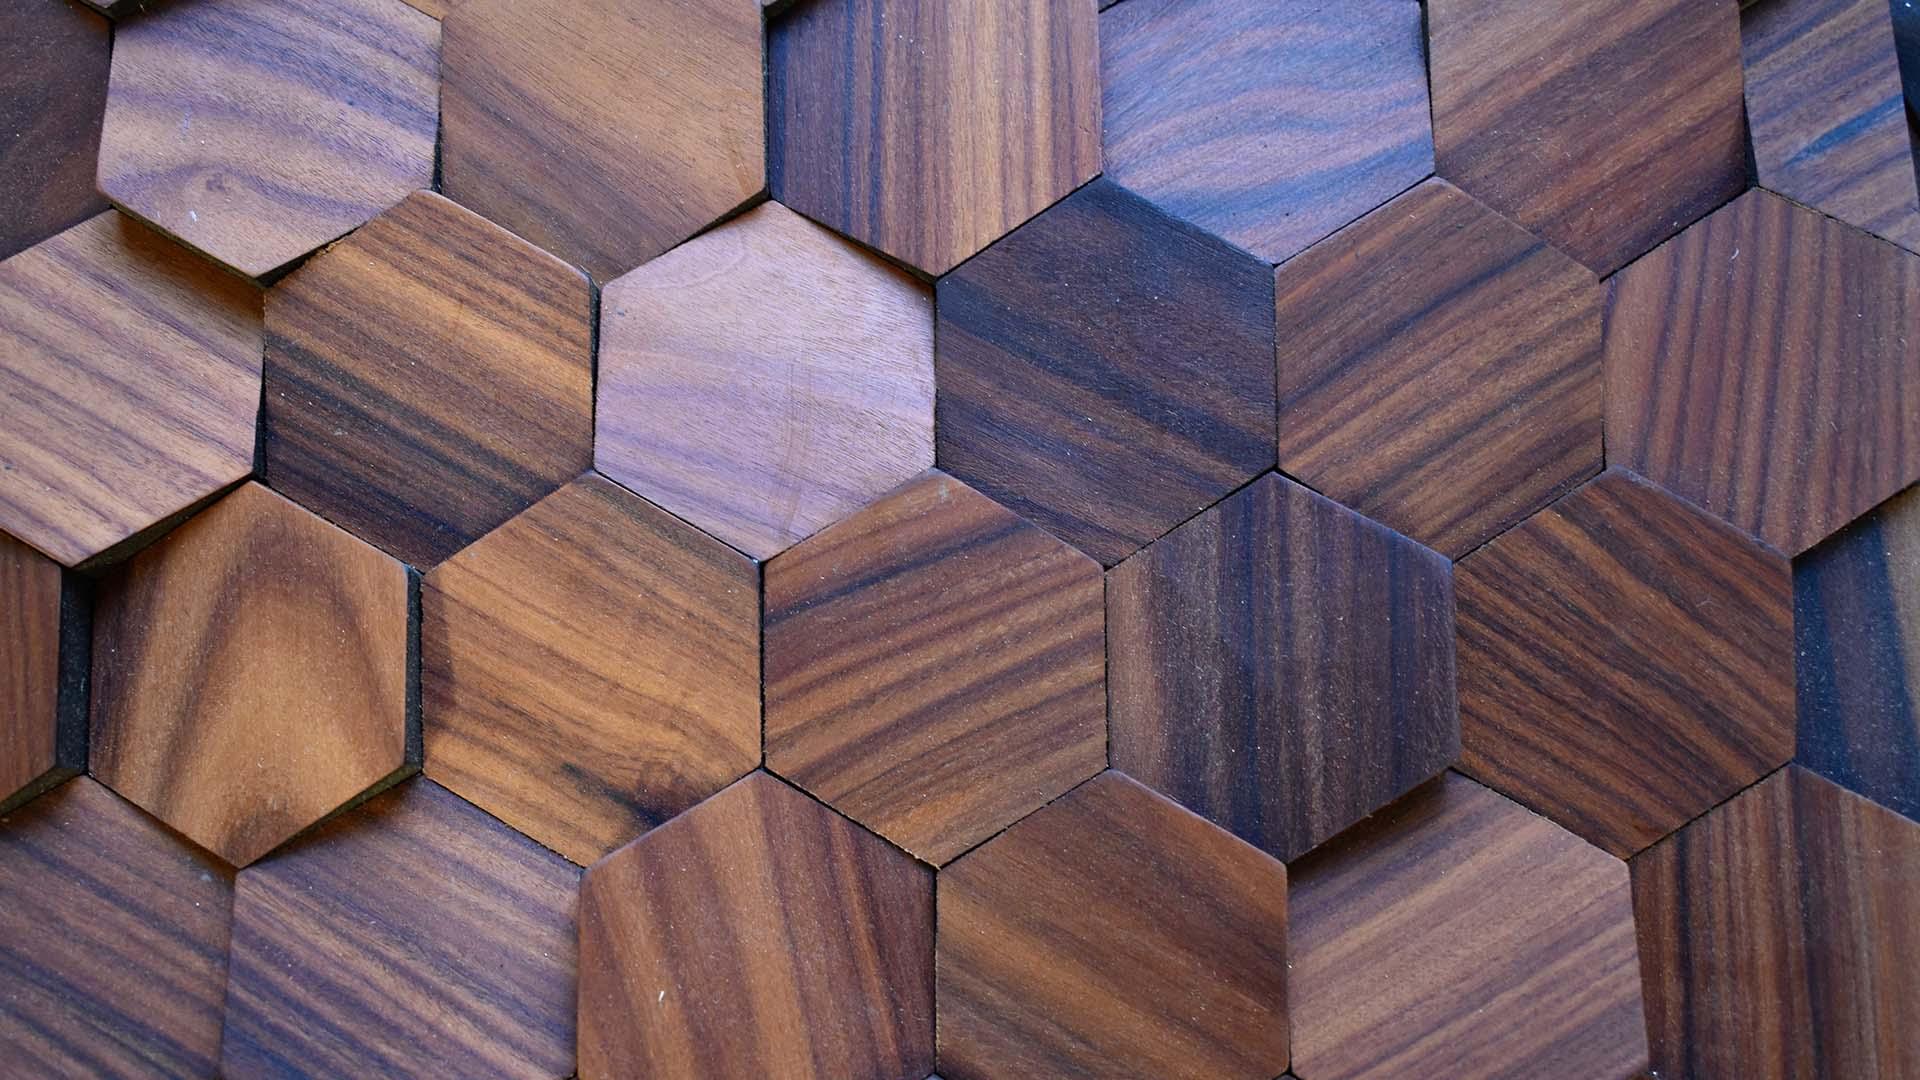 Textured wood material in hexagons